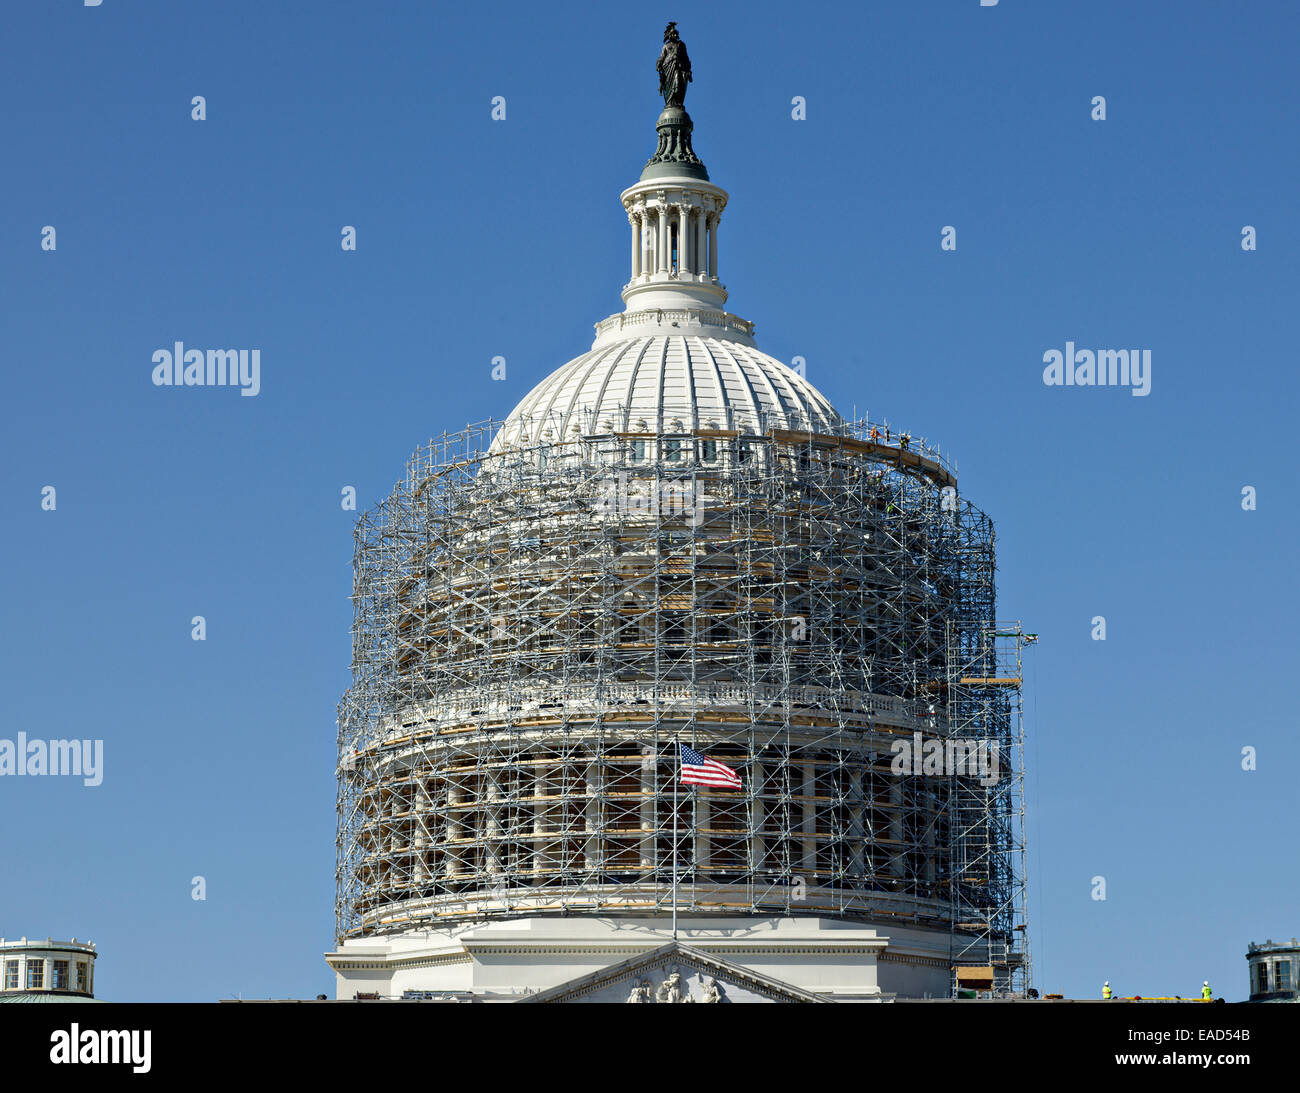 Workers create a scaffold encasing the US Capitol Dome November 12, 2014 in Washington, DC. The $60 million dollar project is to stop the deterioration of the cast iron dome and preserve it for the future. Stock Photo